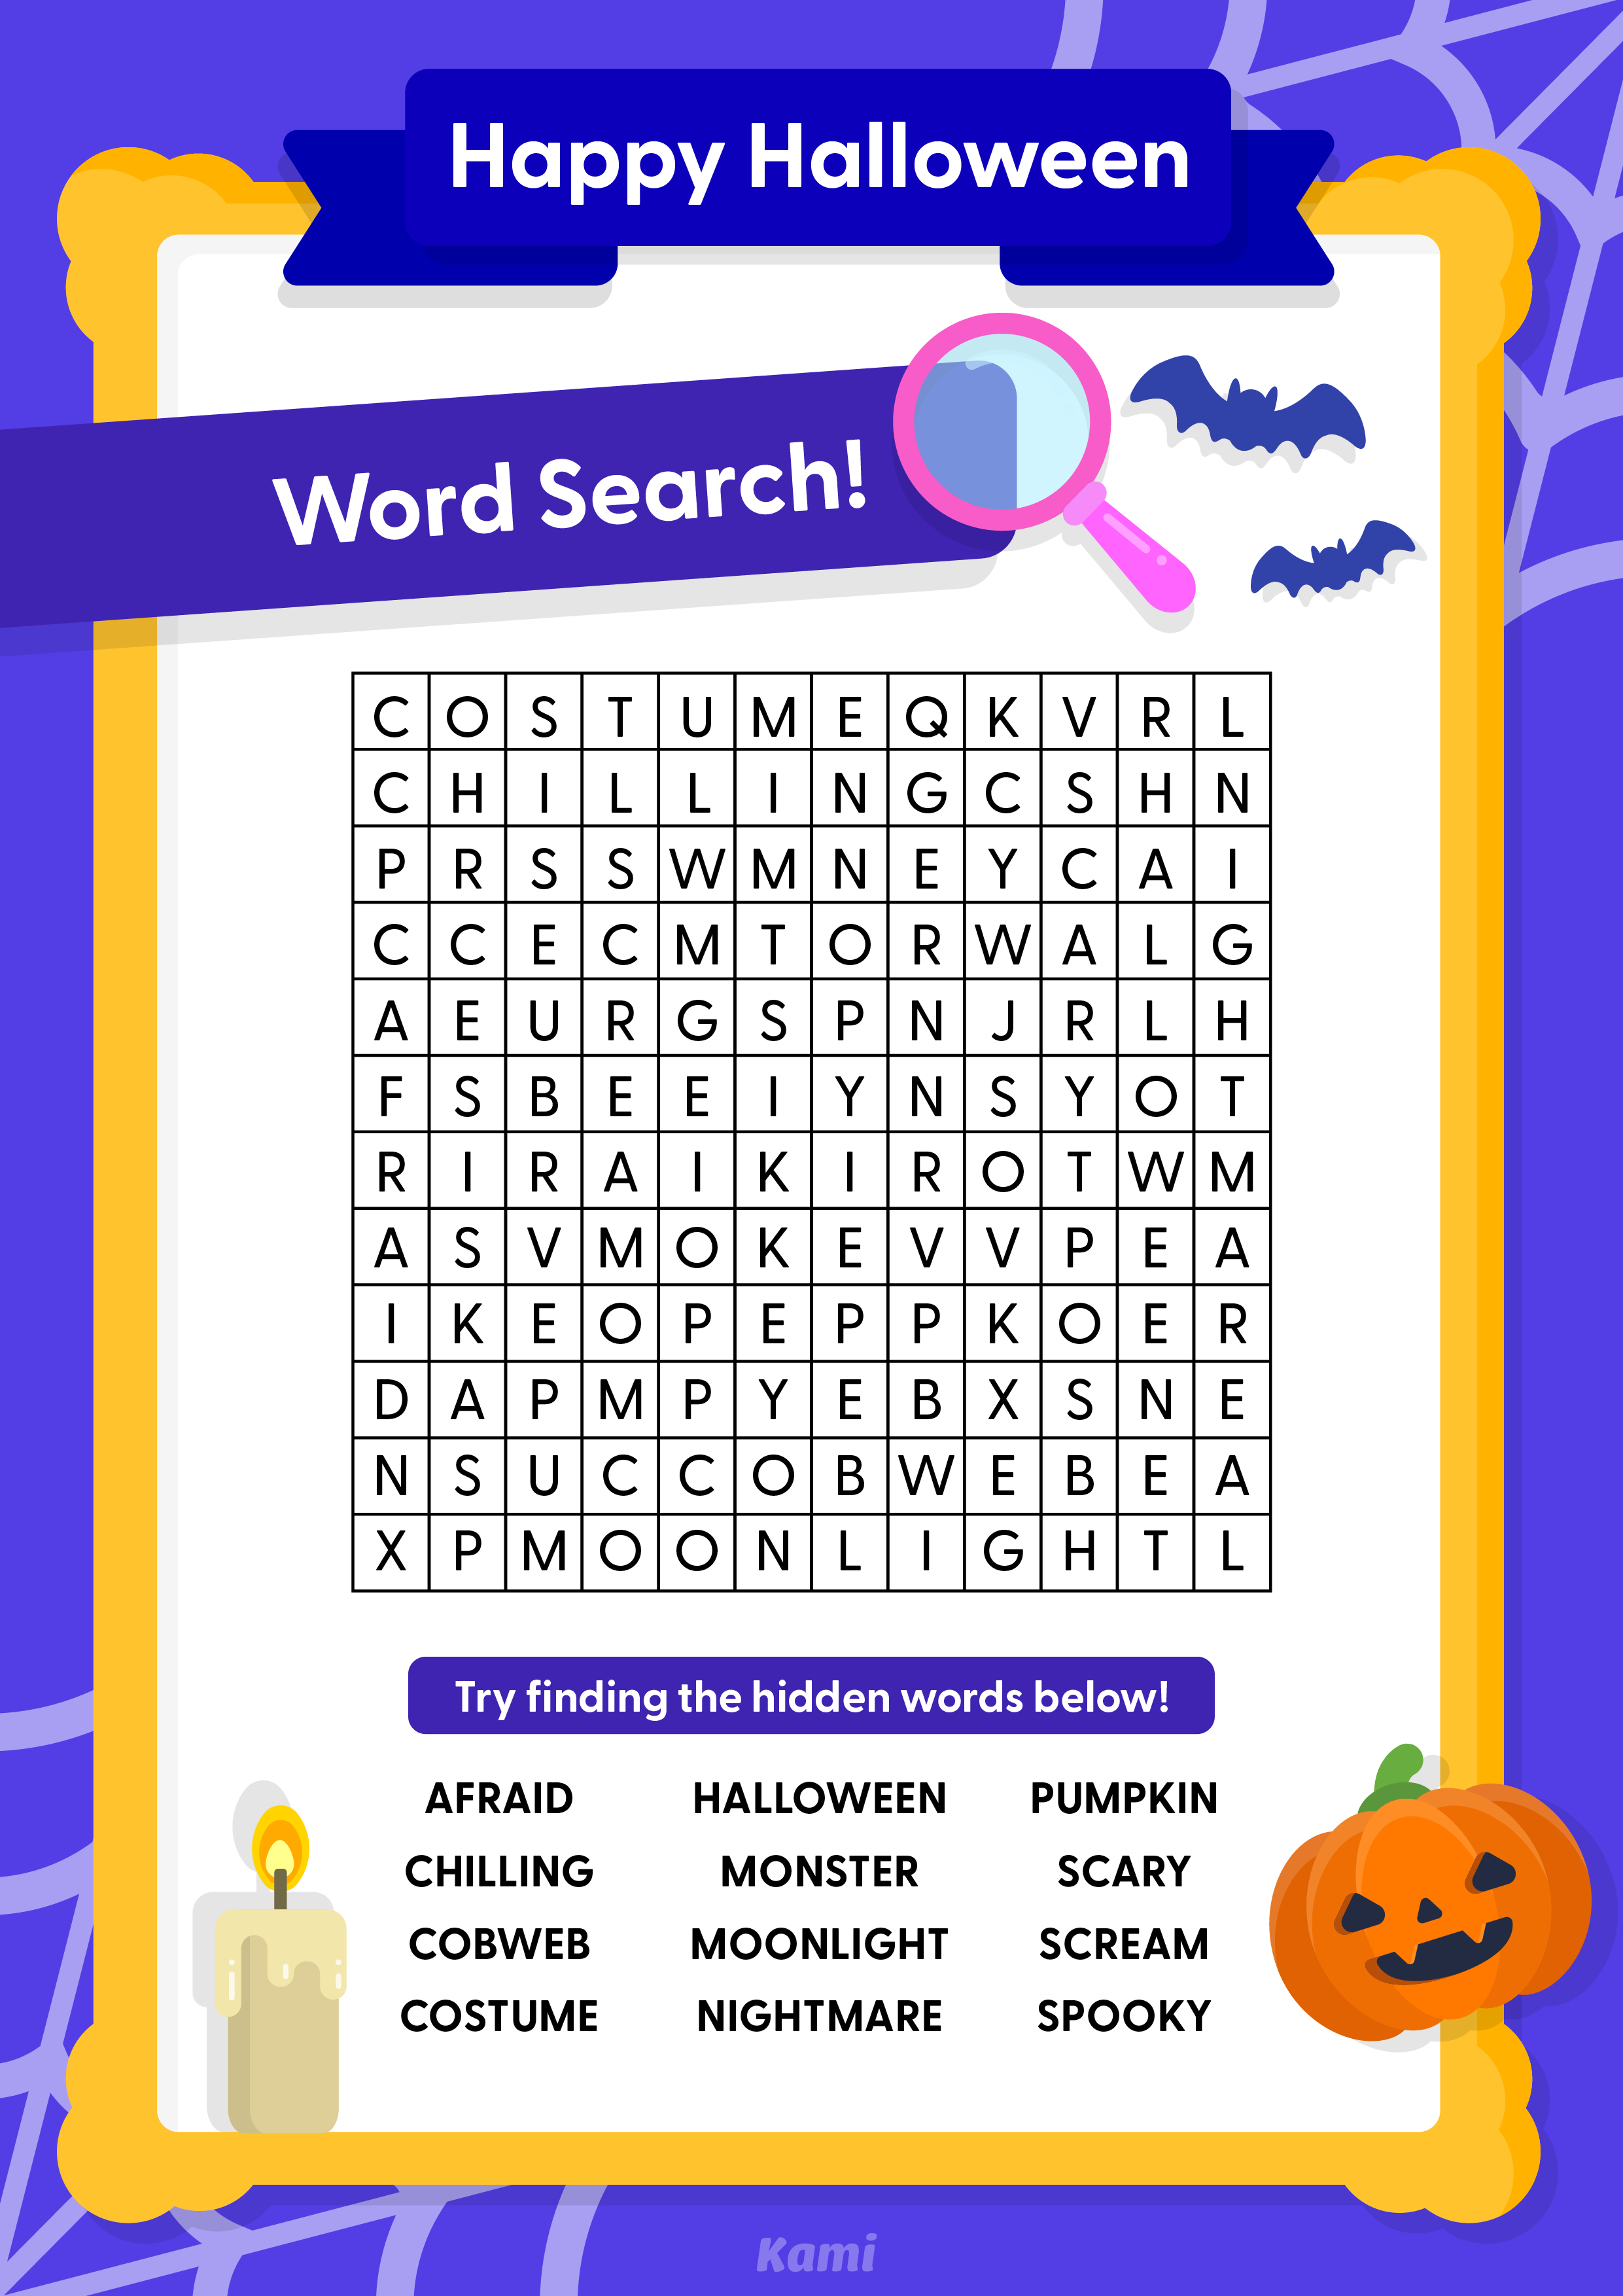 Image of word search